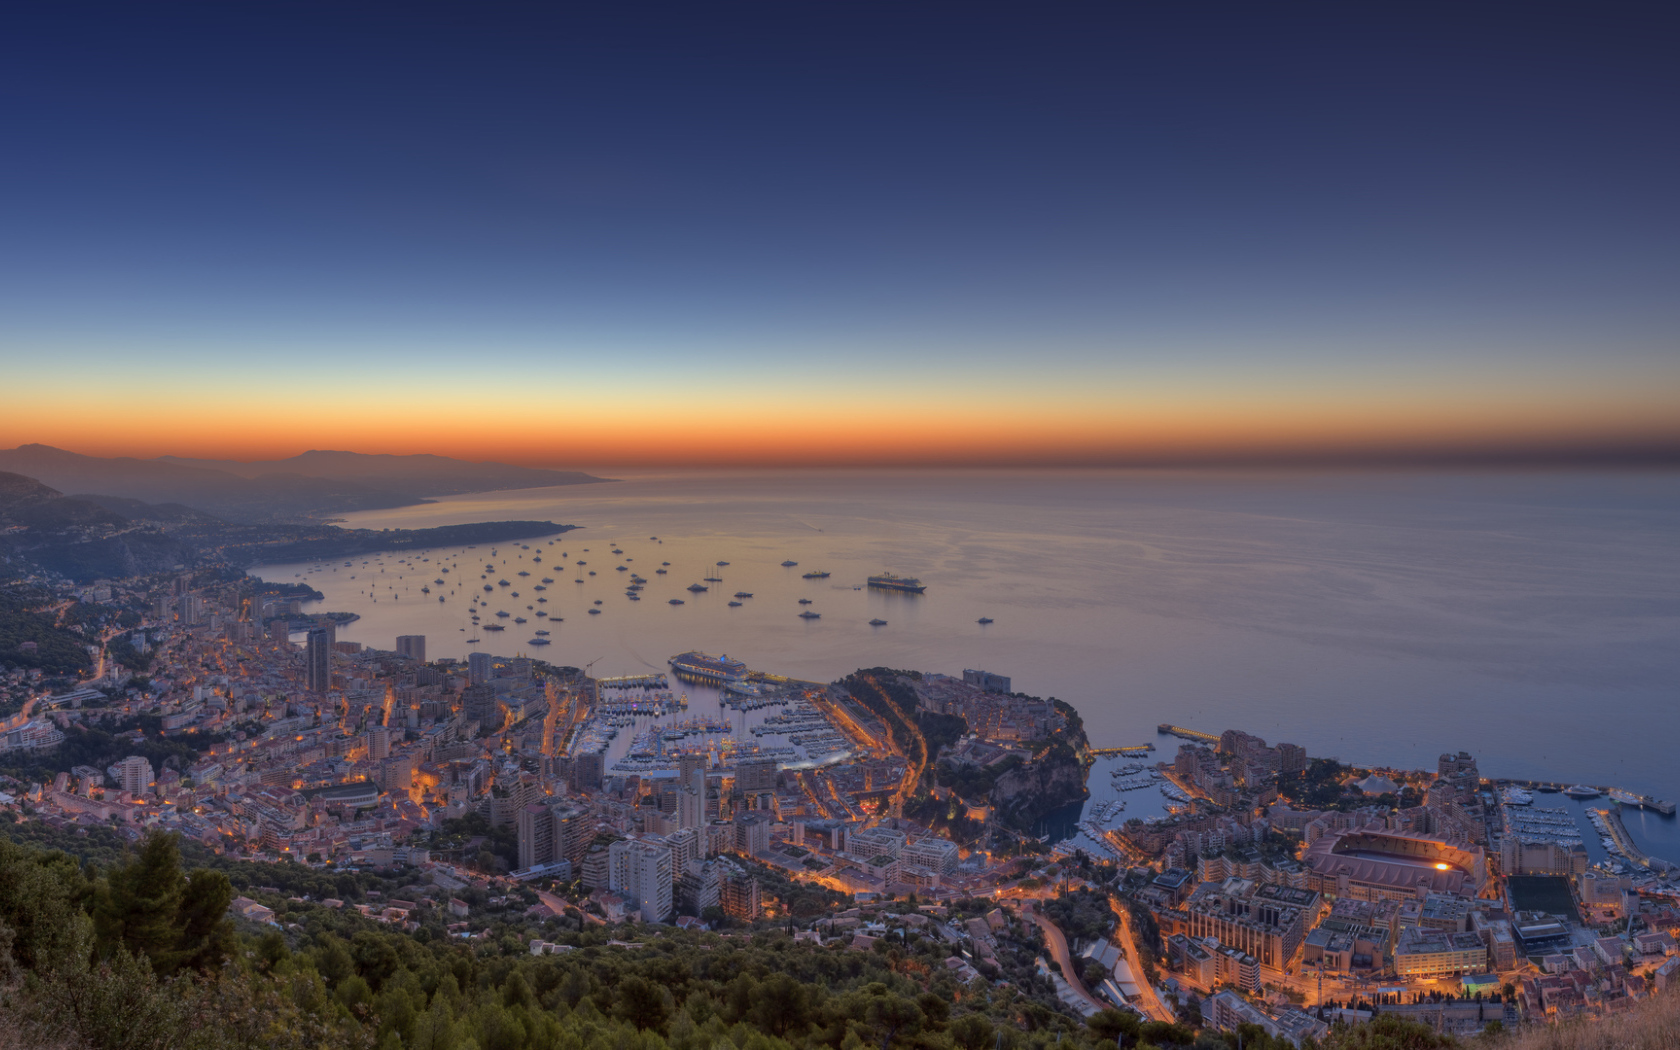 Evening in Monte Carlo, France